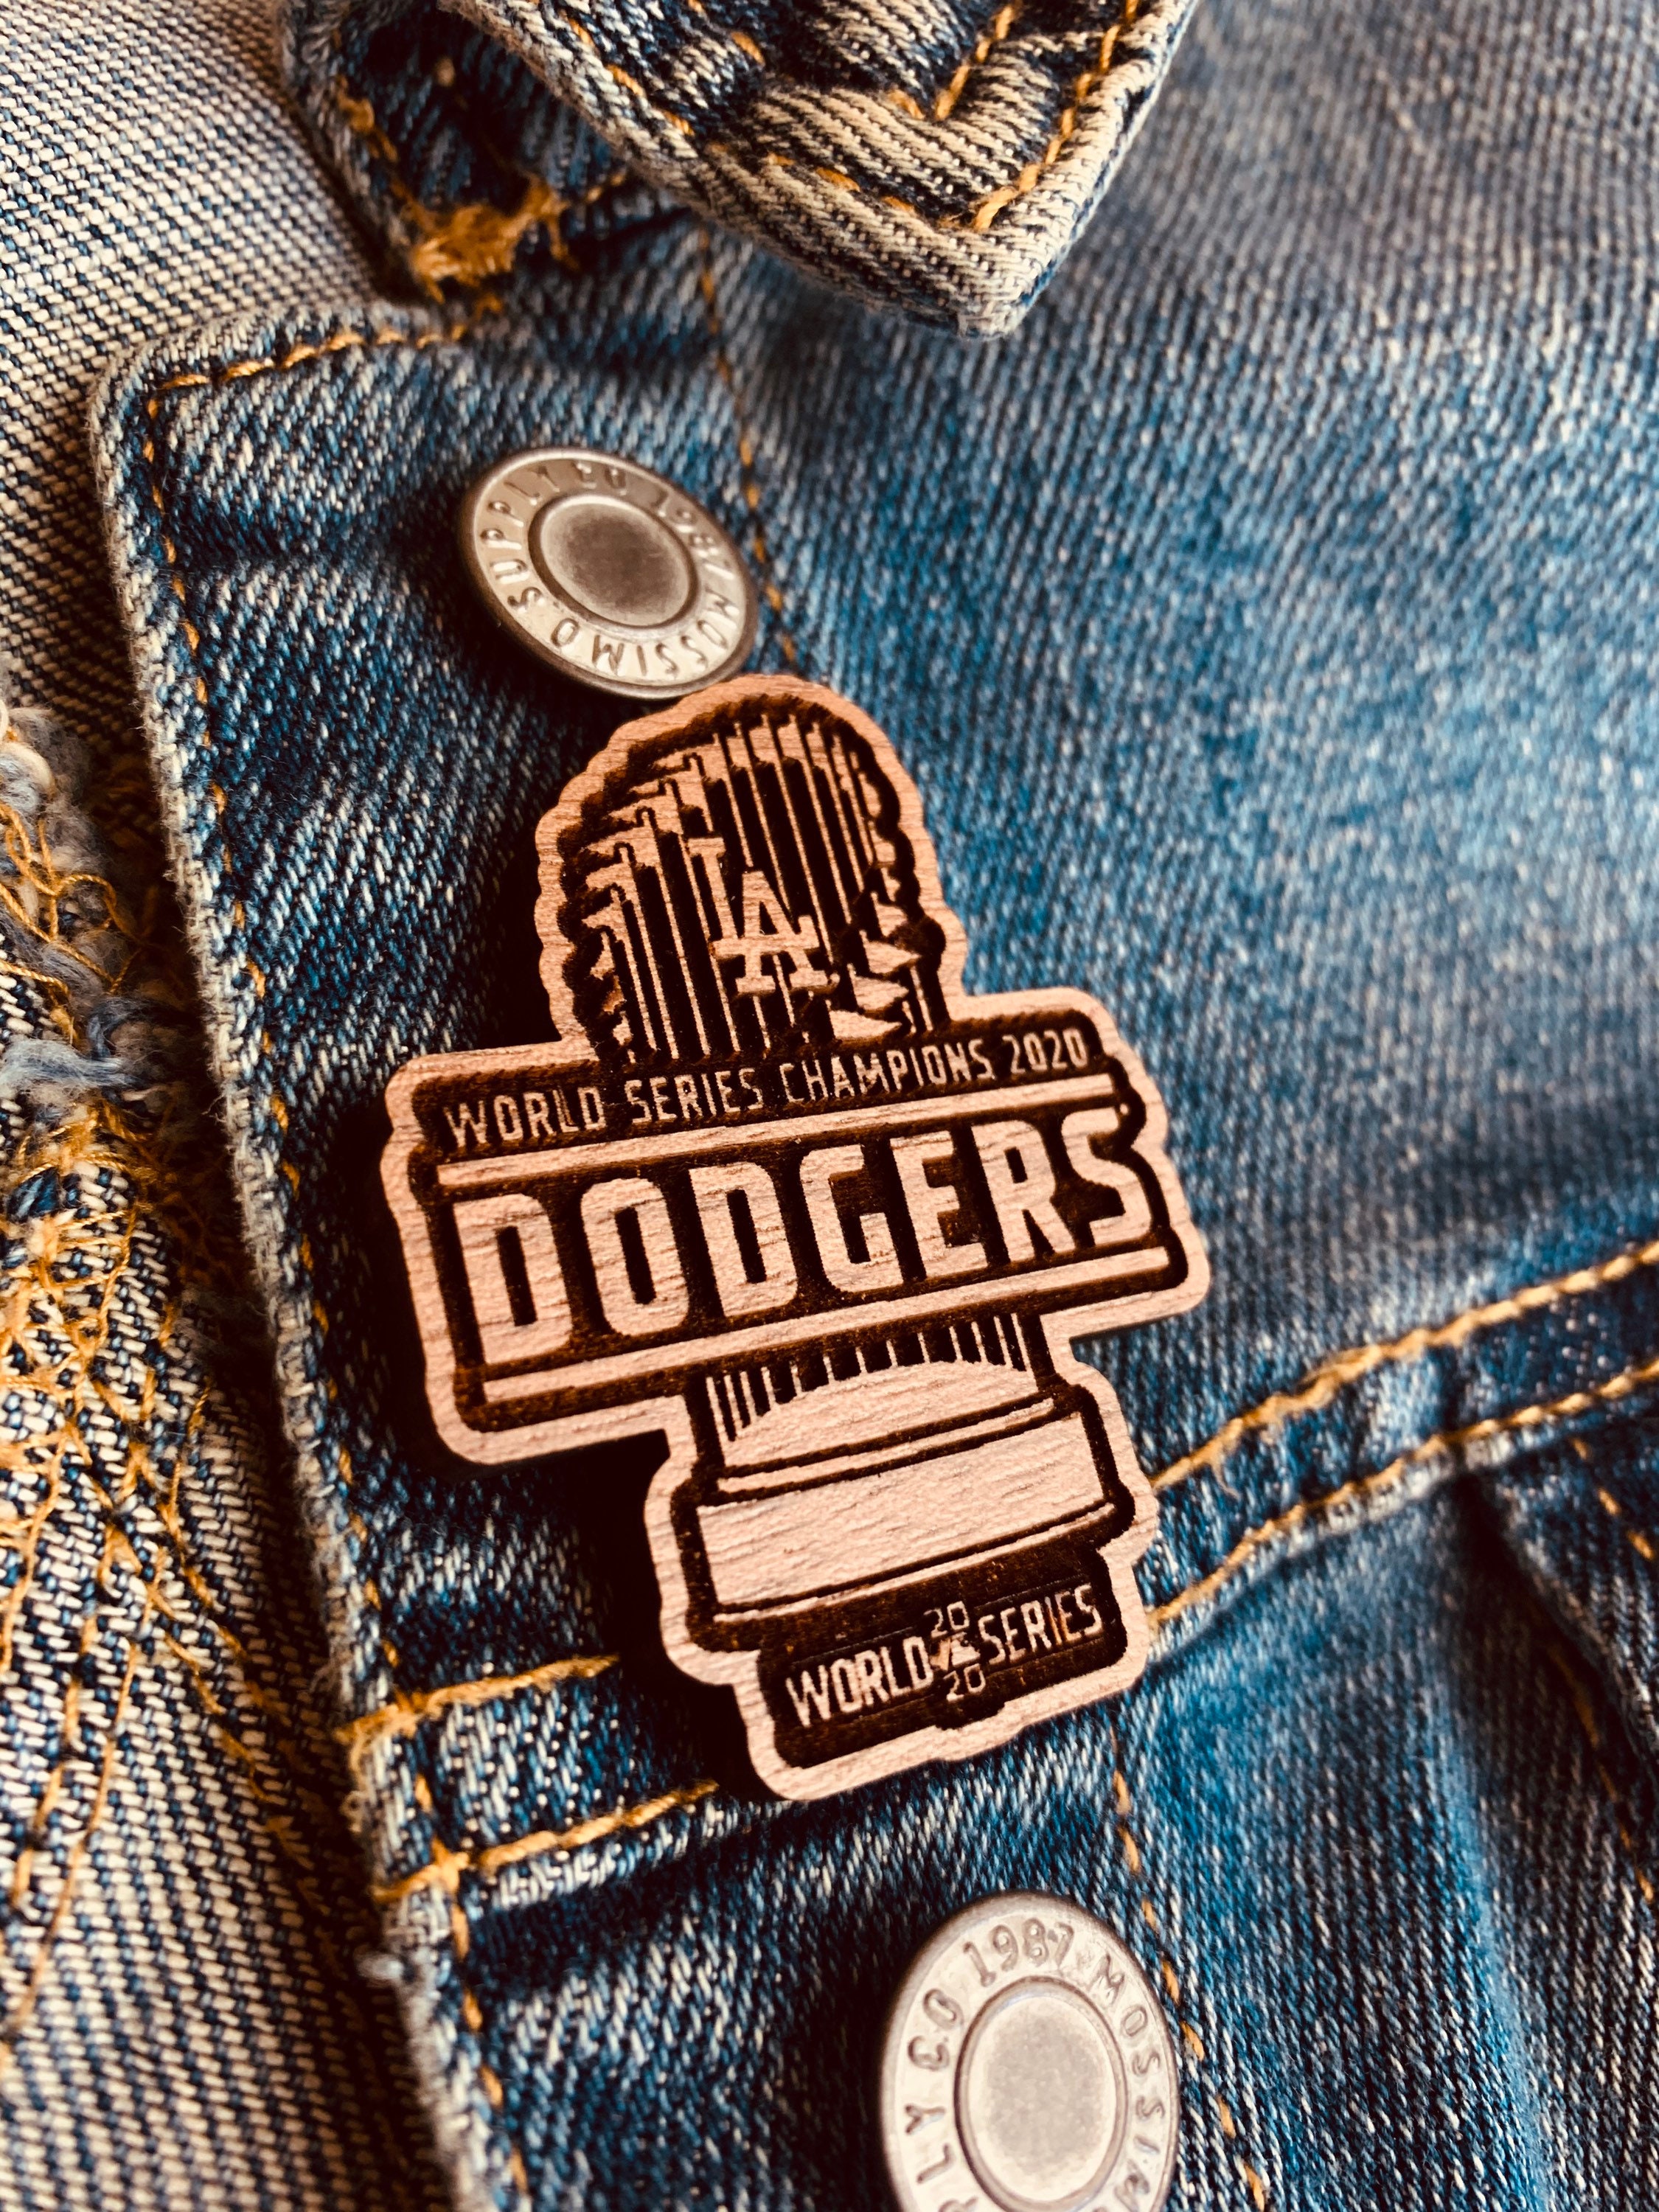 Los Angeles Dodgers 2020 World Series Pin